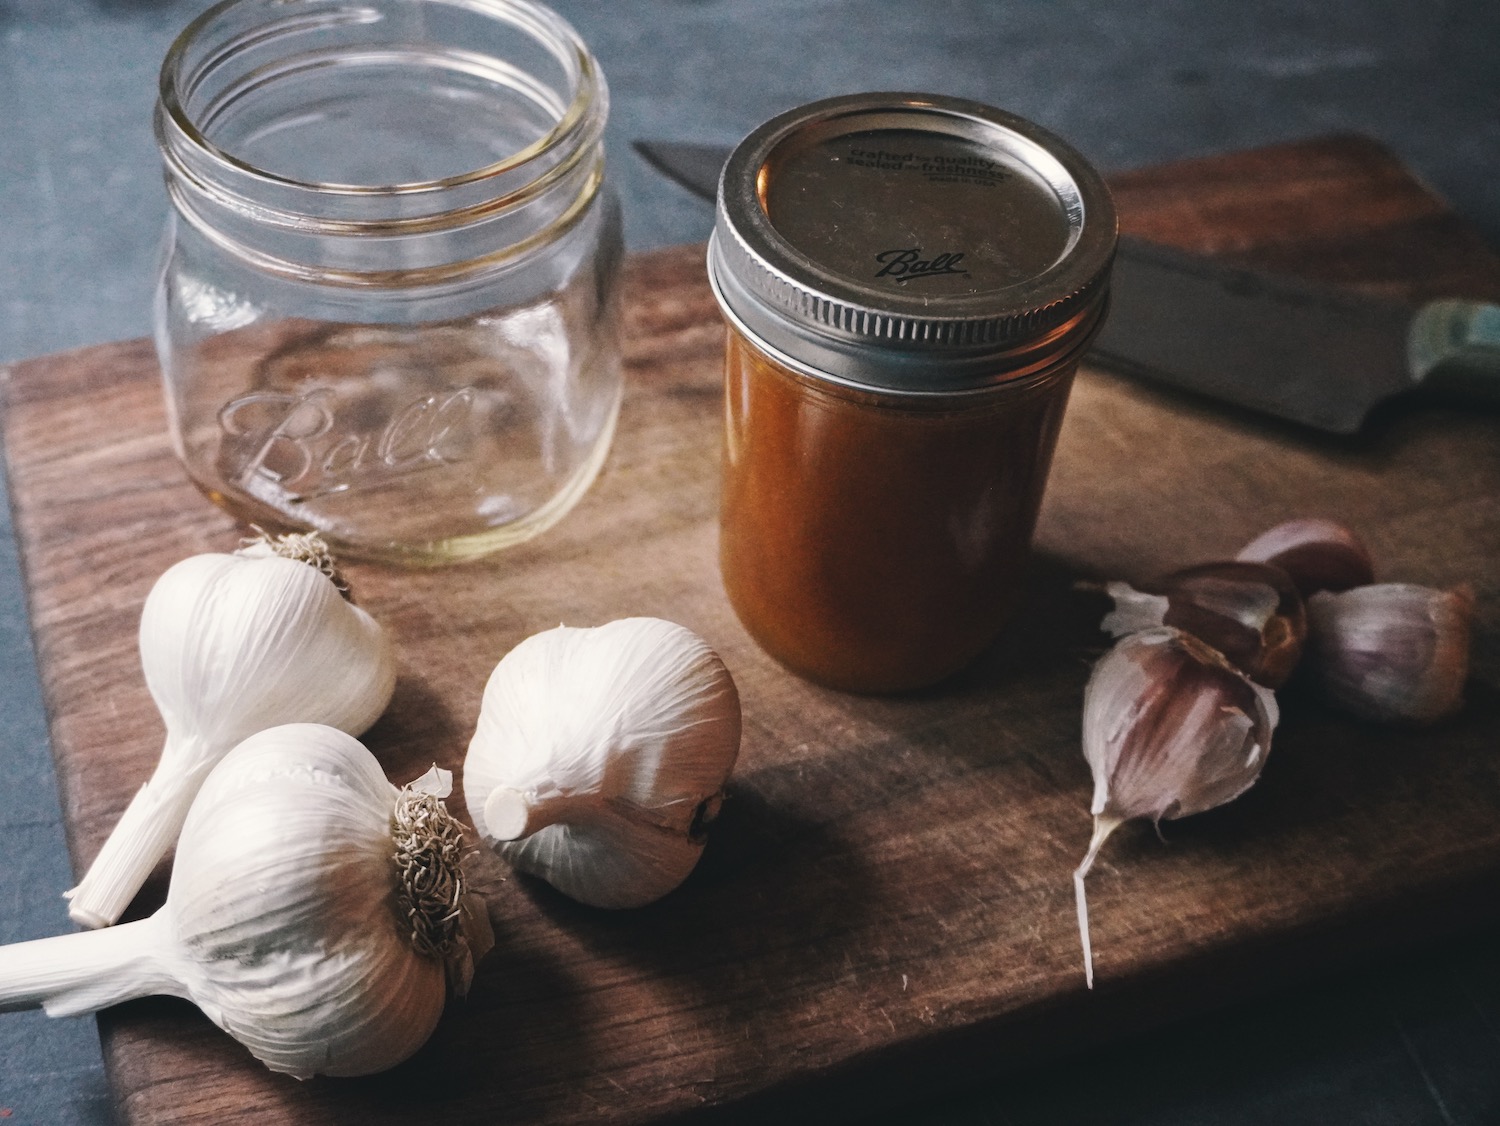 Ingredients for making fermented honey garlic spread out on a wooden cutting board